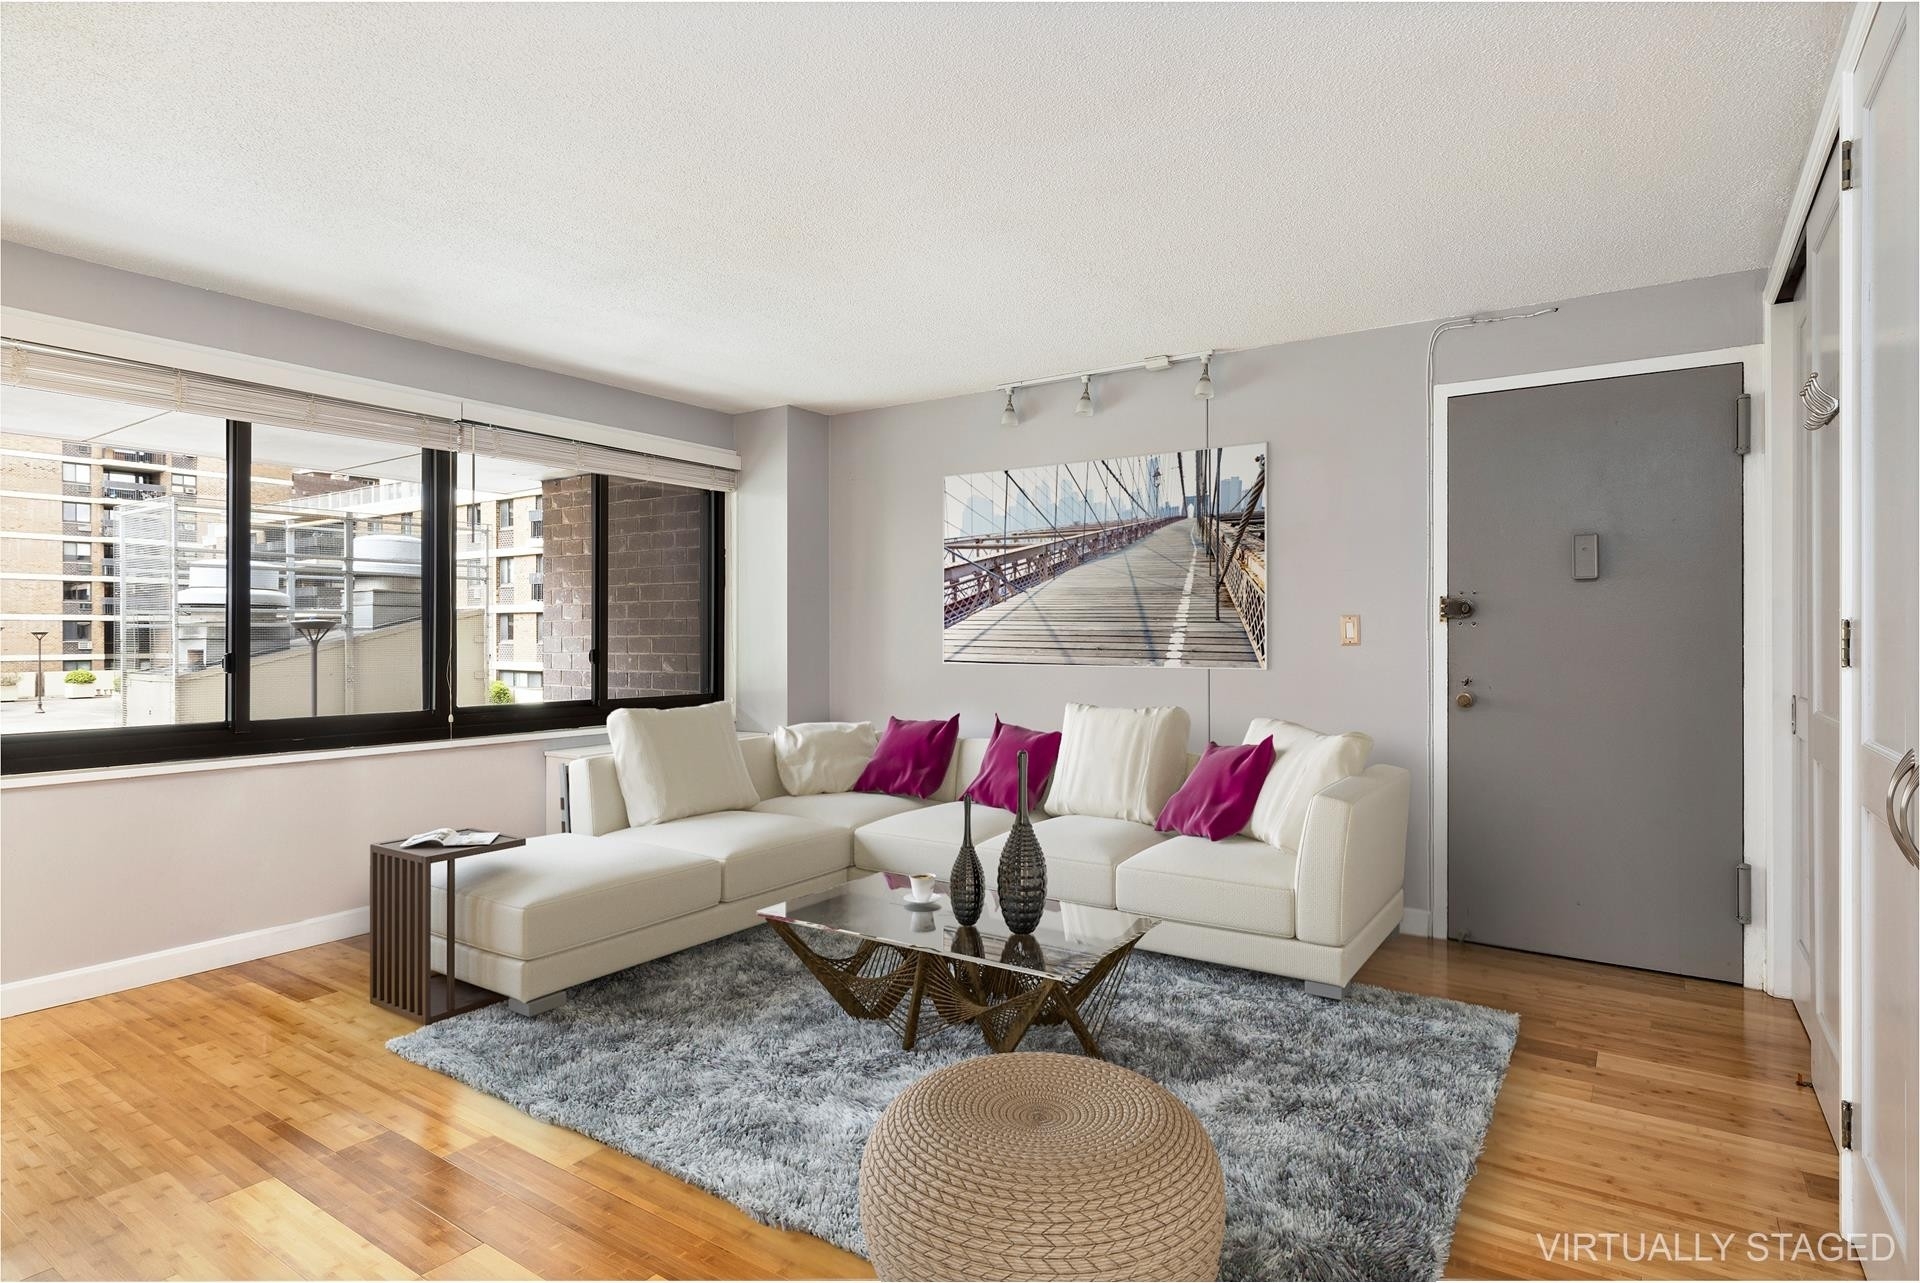 Co-op Properties for Sale at SOUTHBRIDGE TOWERS, 90 GOLD ST, 4A Financial District, New York, New York 10038